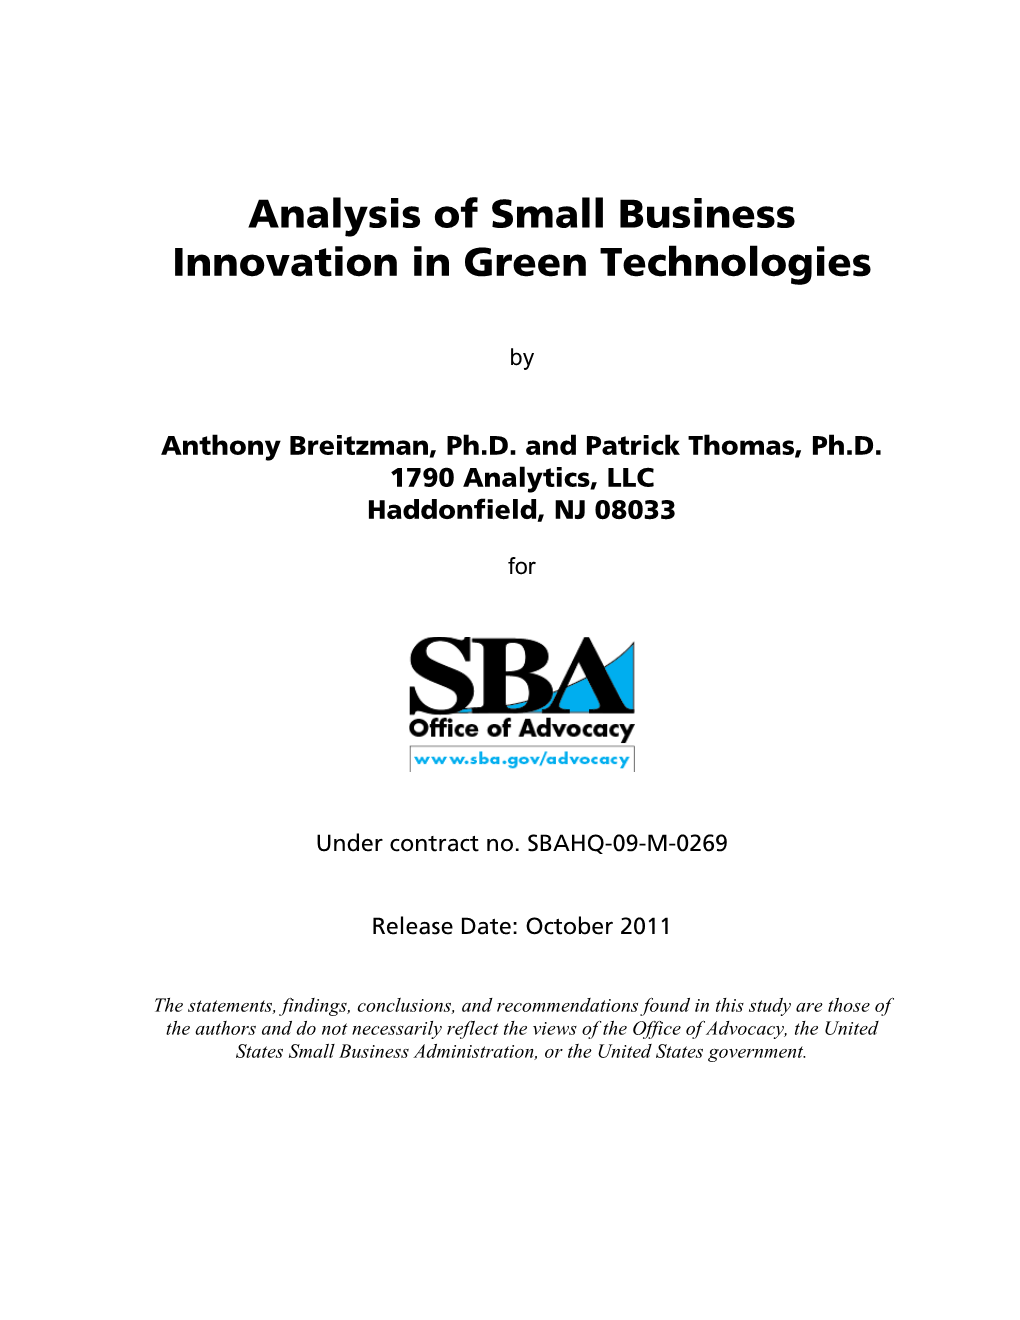 Analysis of Small Business Innovation in Green Technologies